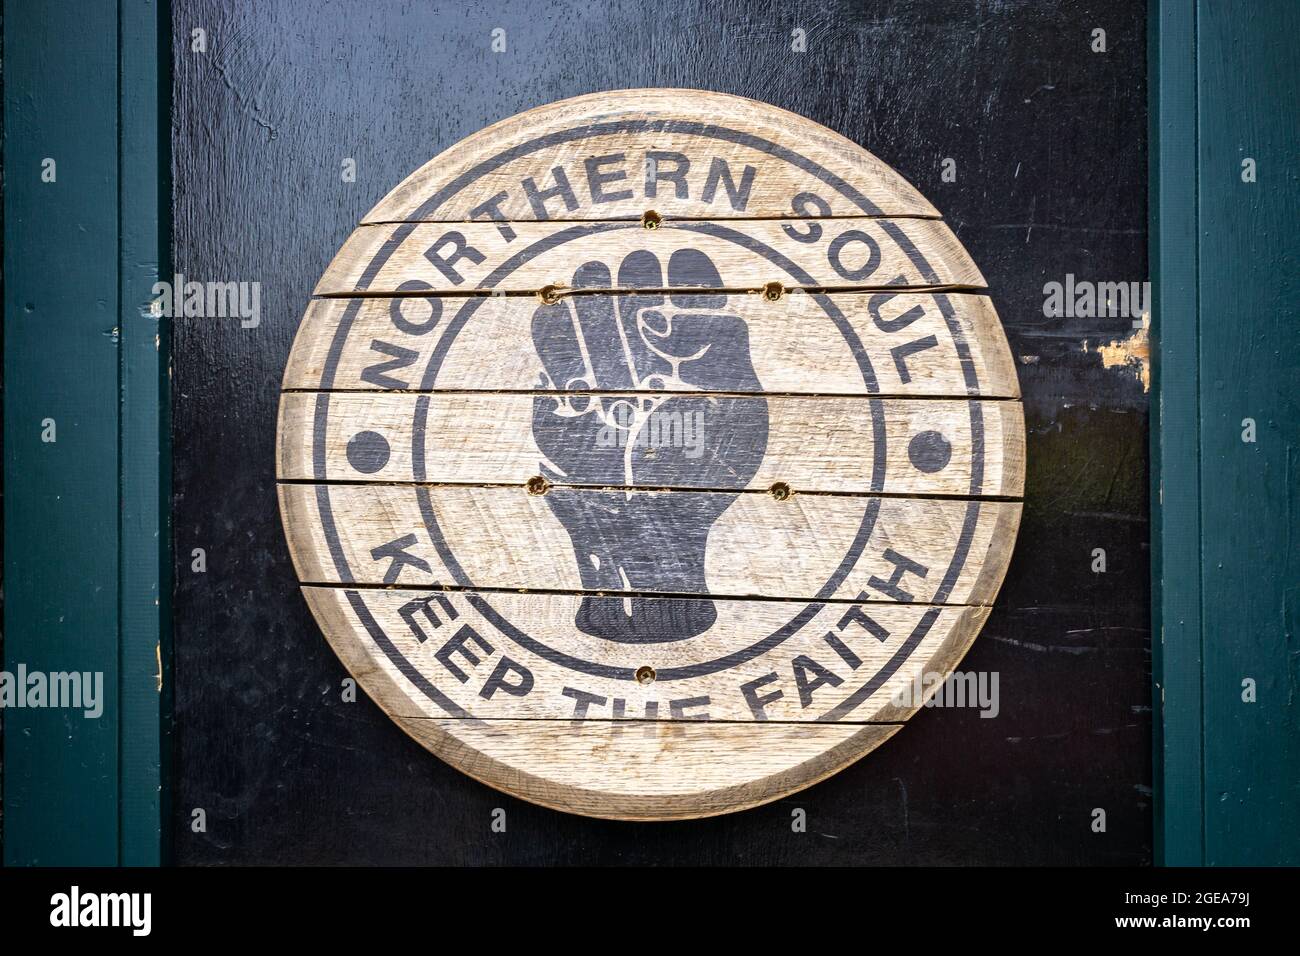 Northern Soul, Keep the Faith wooden sign on door in Sheffield, Yorkshire, UK on 18 May 2018 Stock Photo